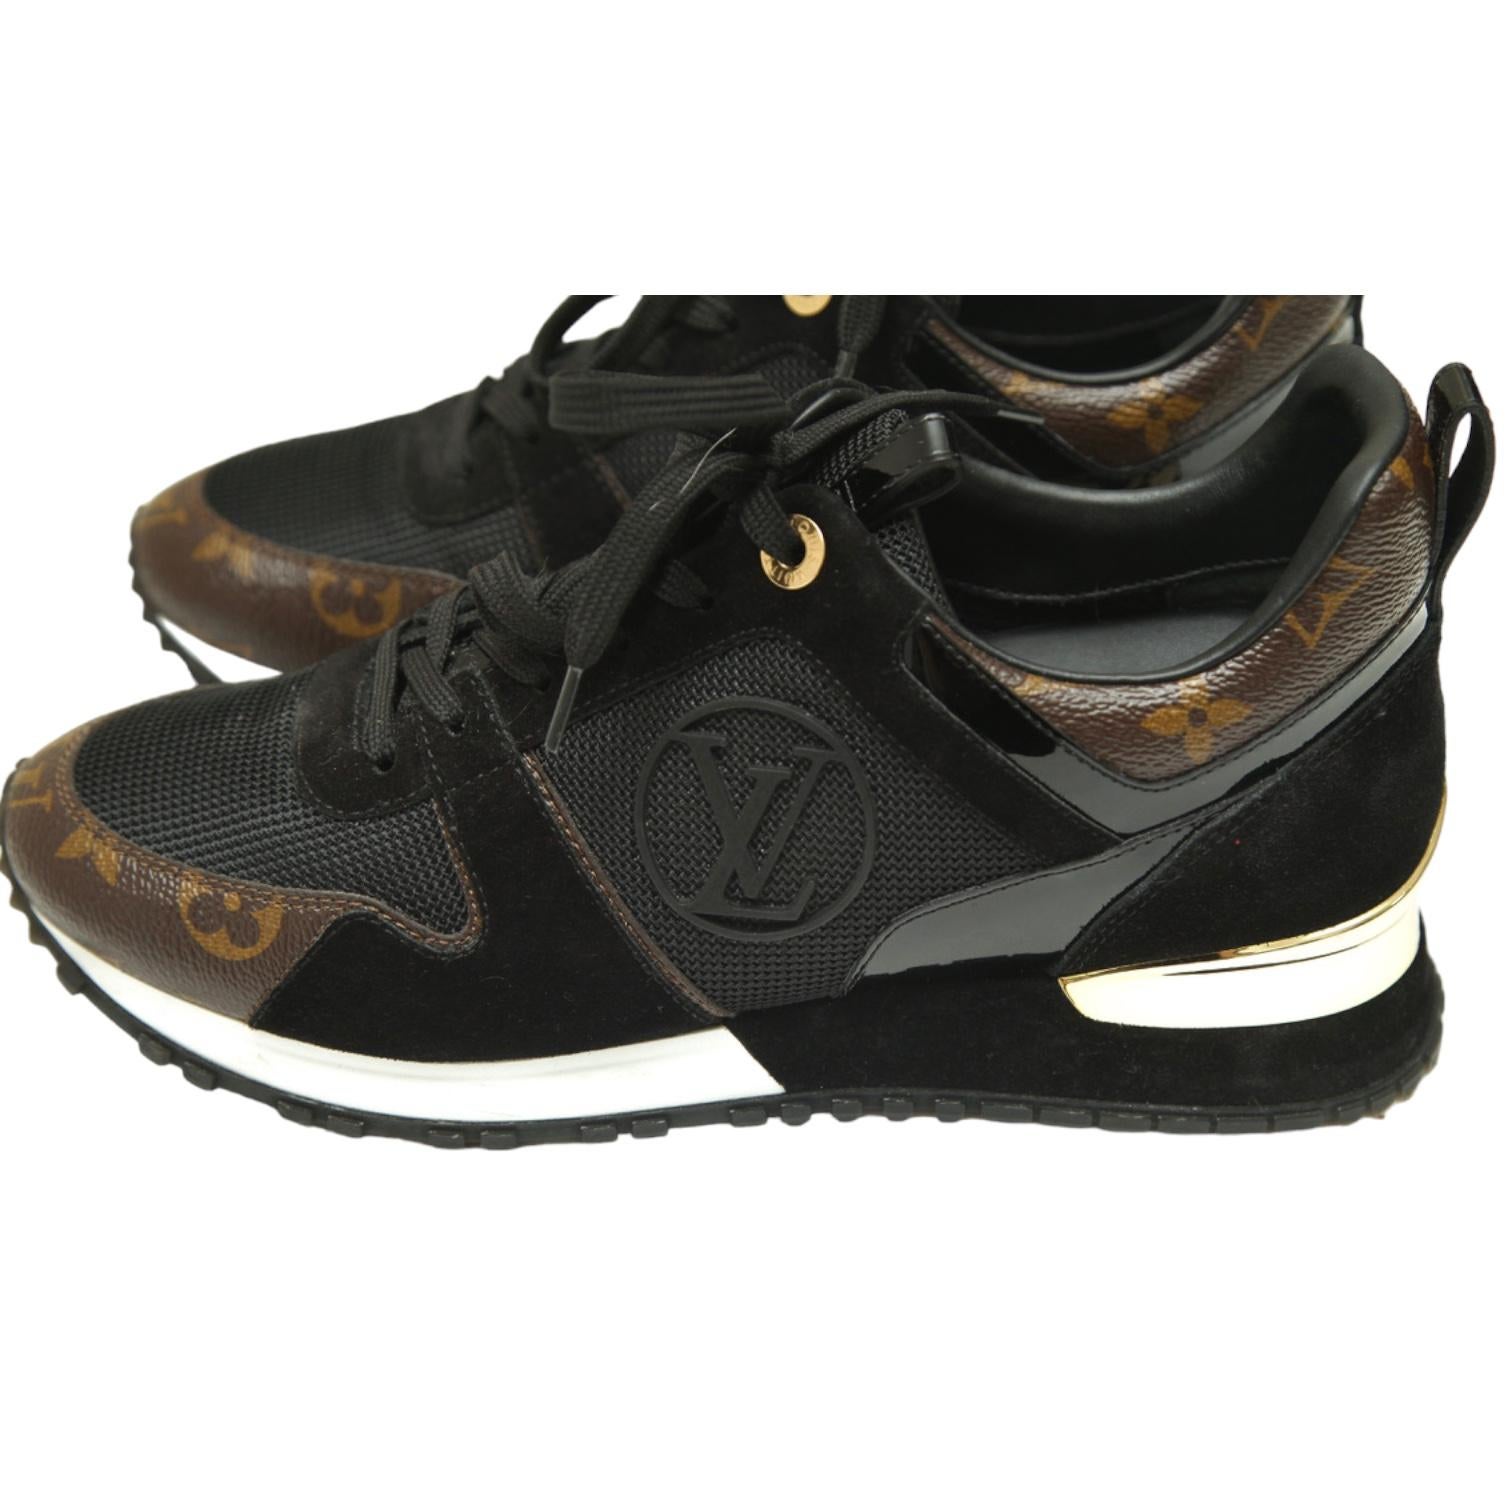 LOUIS VUITTON Sneakers RUN AWAY Black Suede Monogram Gold Lace Up Trainer Sz 38 For Sale 1